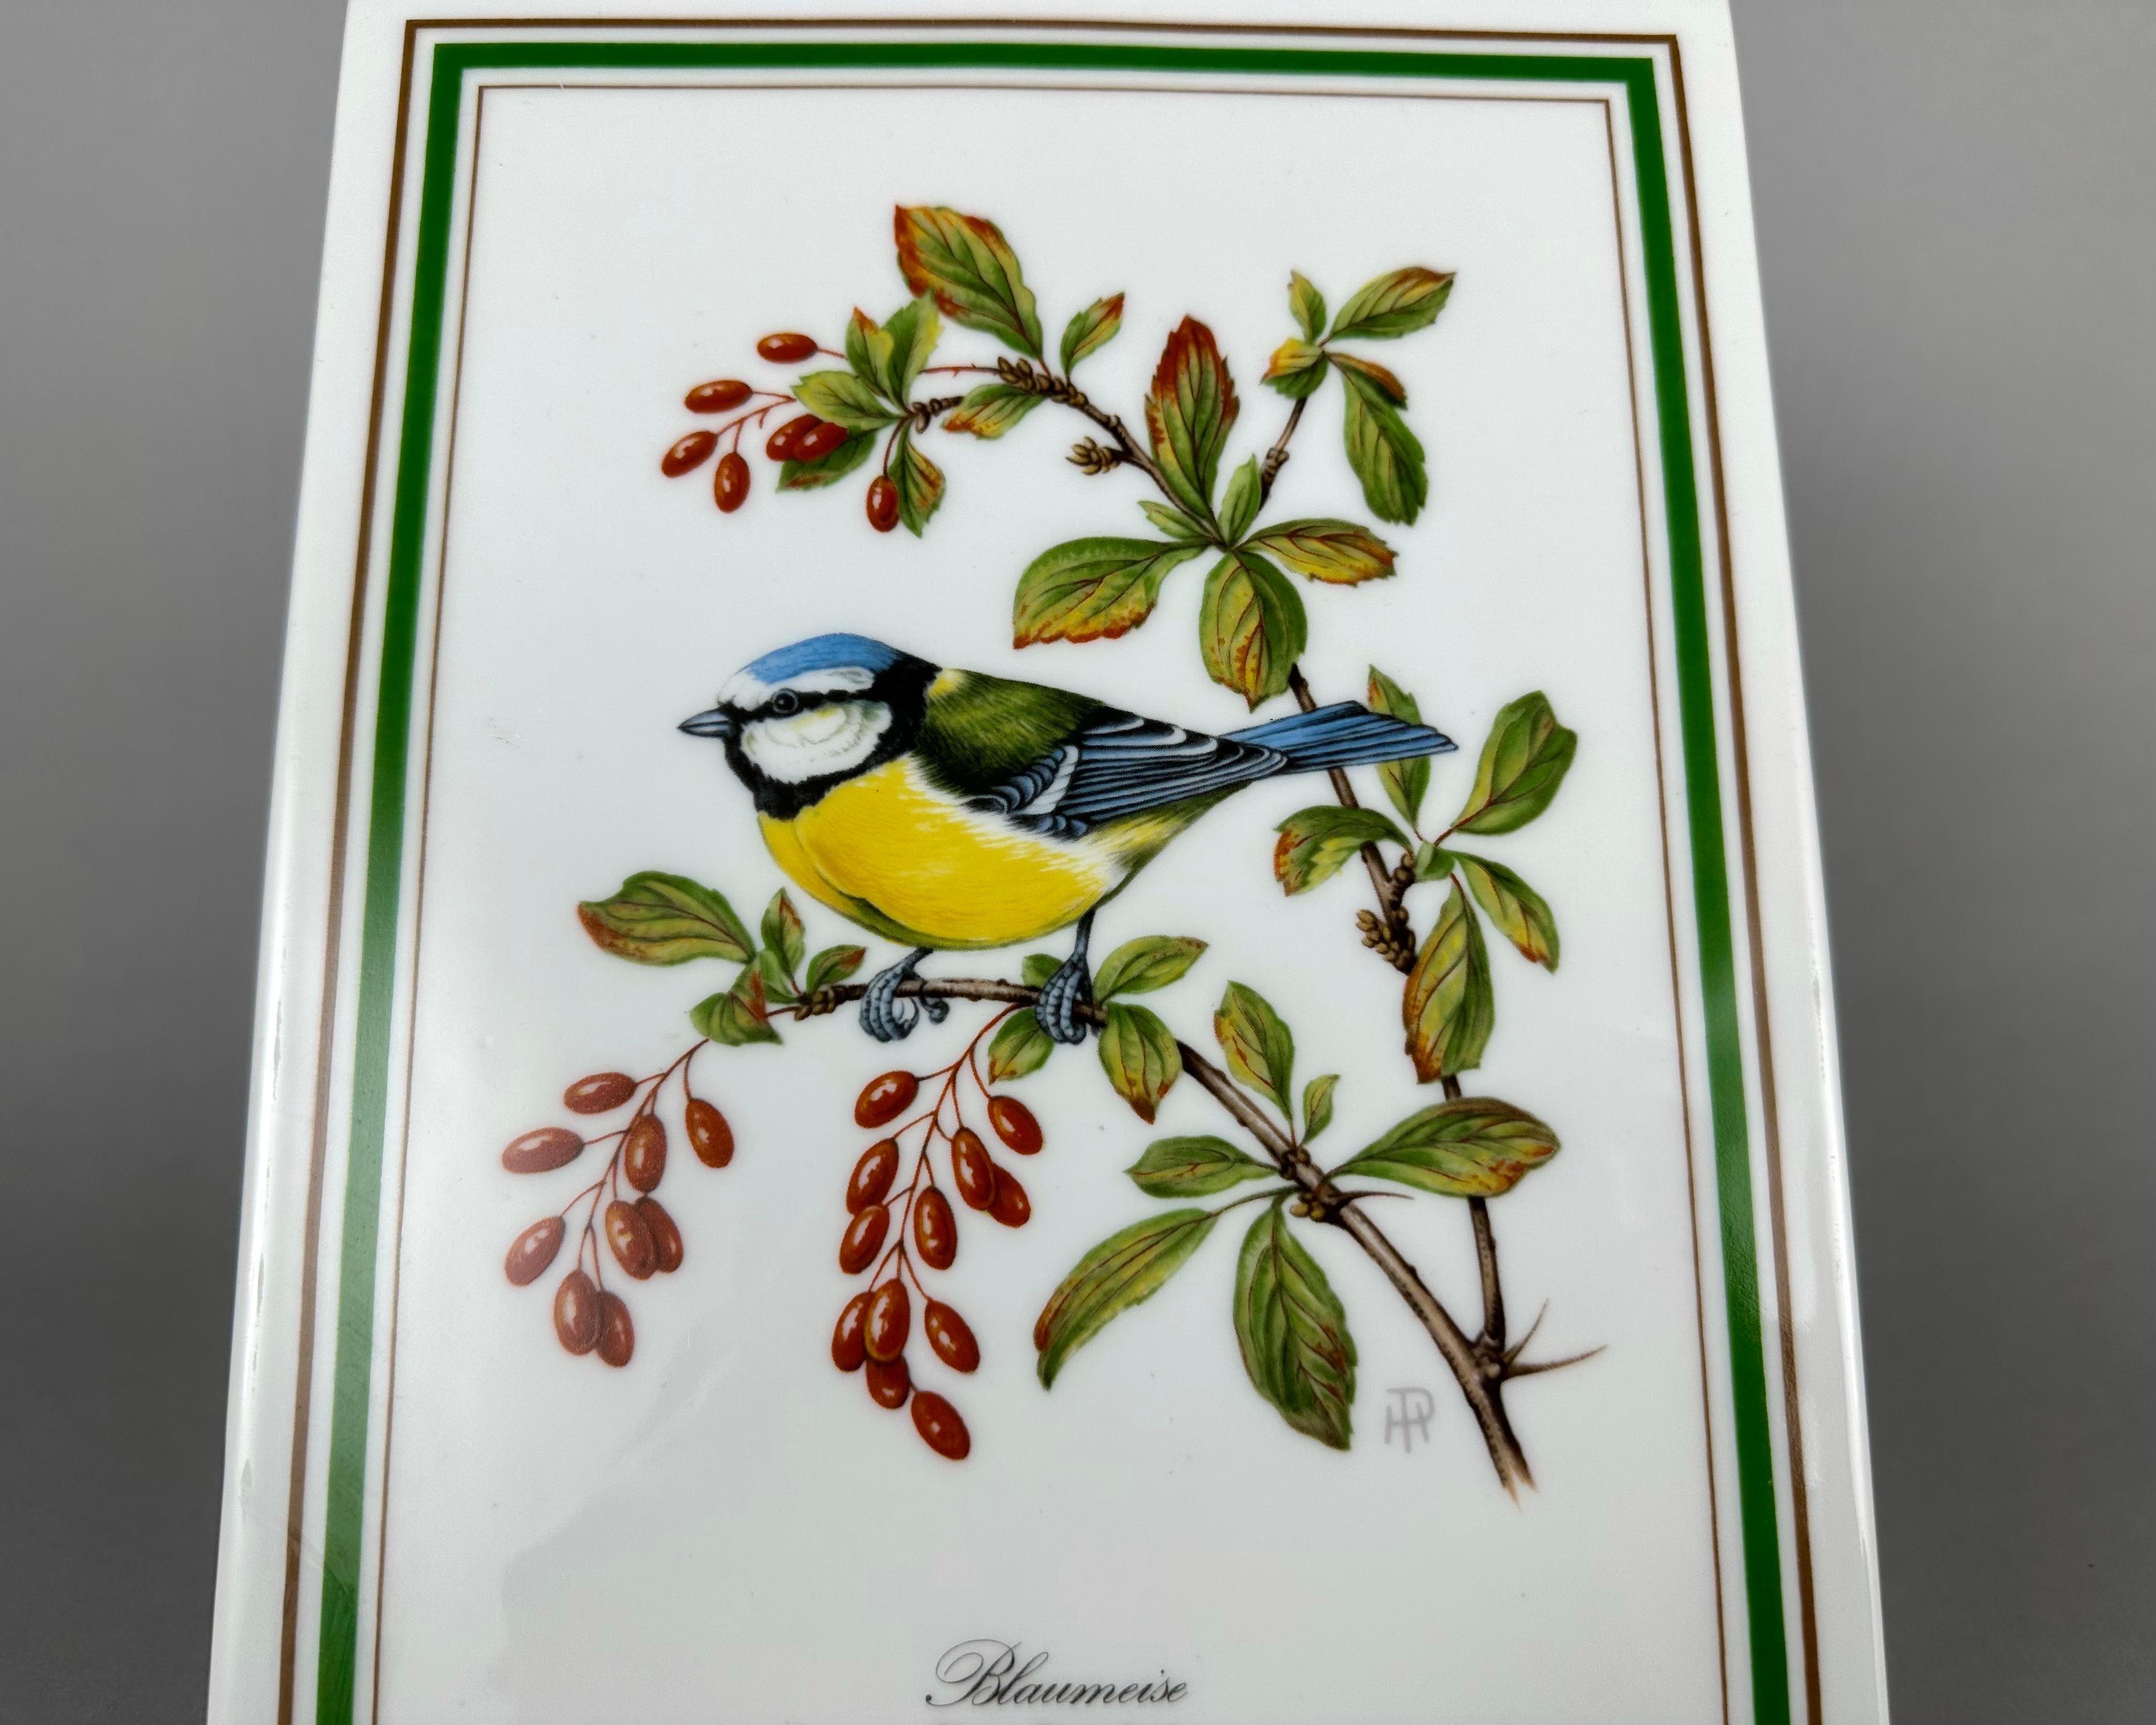 Beautiful Royal Tettau porcelain plaque featuring the Parus Caeruleus from their European Singing Bird collection.

This limited edition series was produced in 1972 and 1973 in Bavaria, Germany.

A porcelain wall plaque is an ideal way to decorate